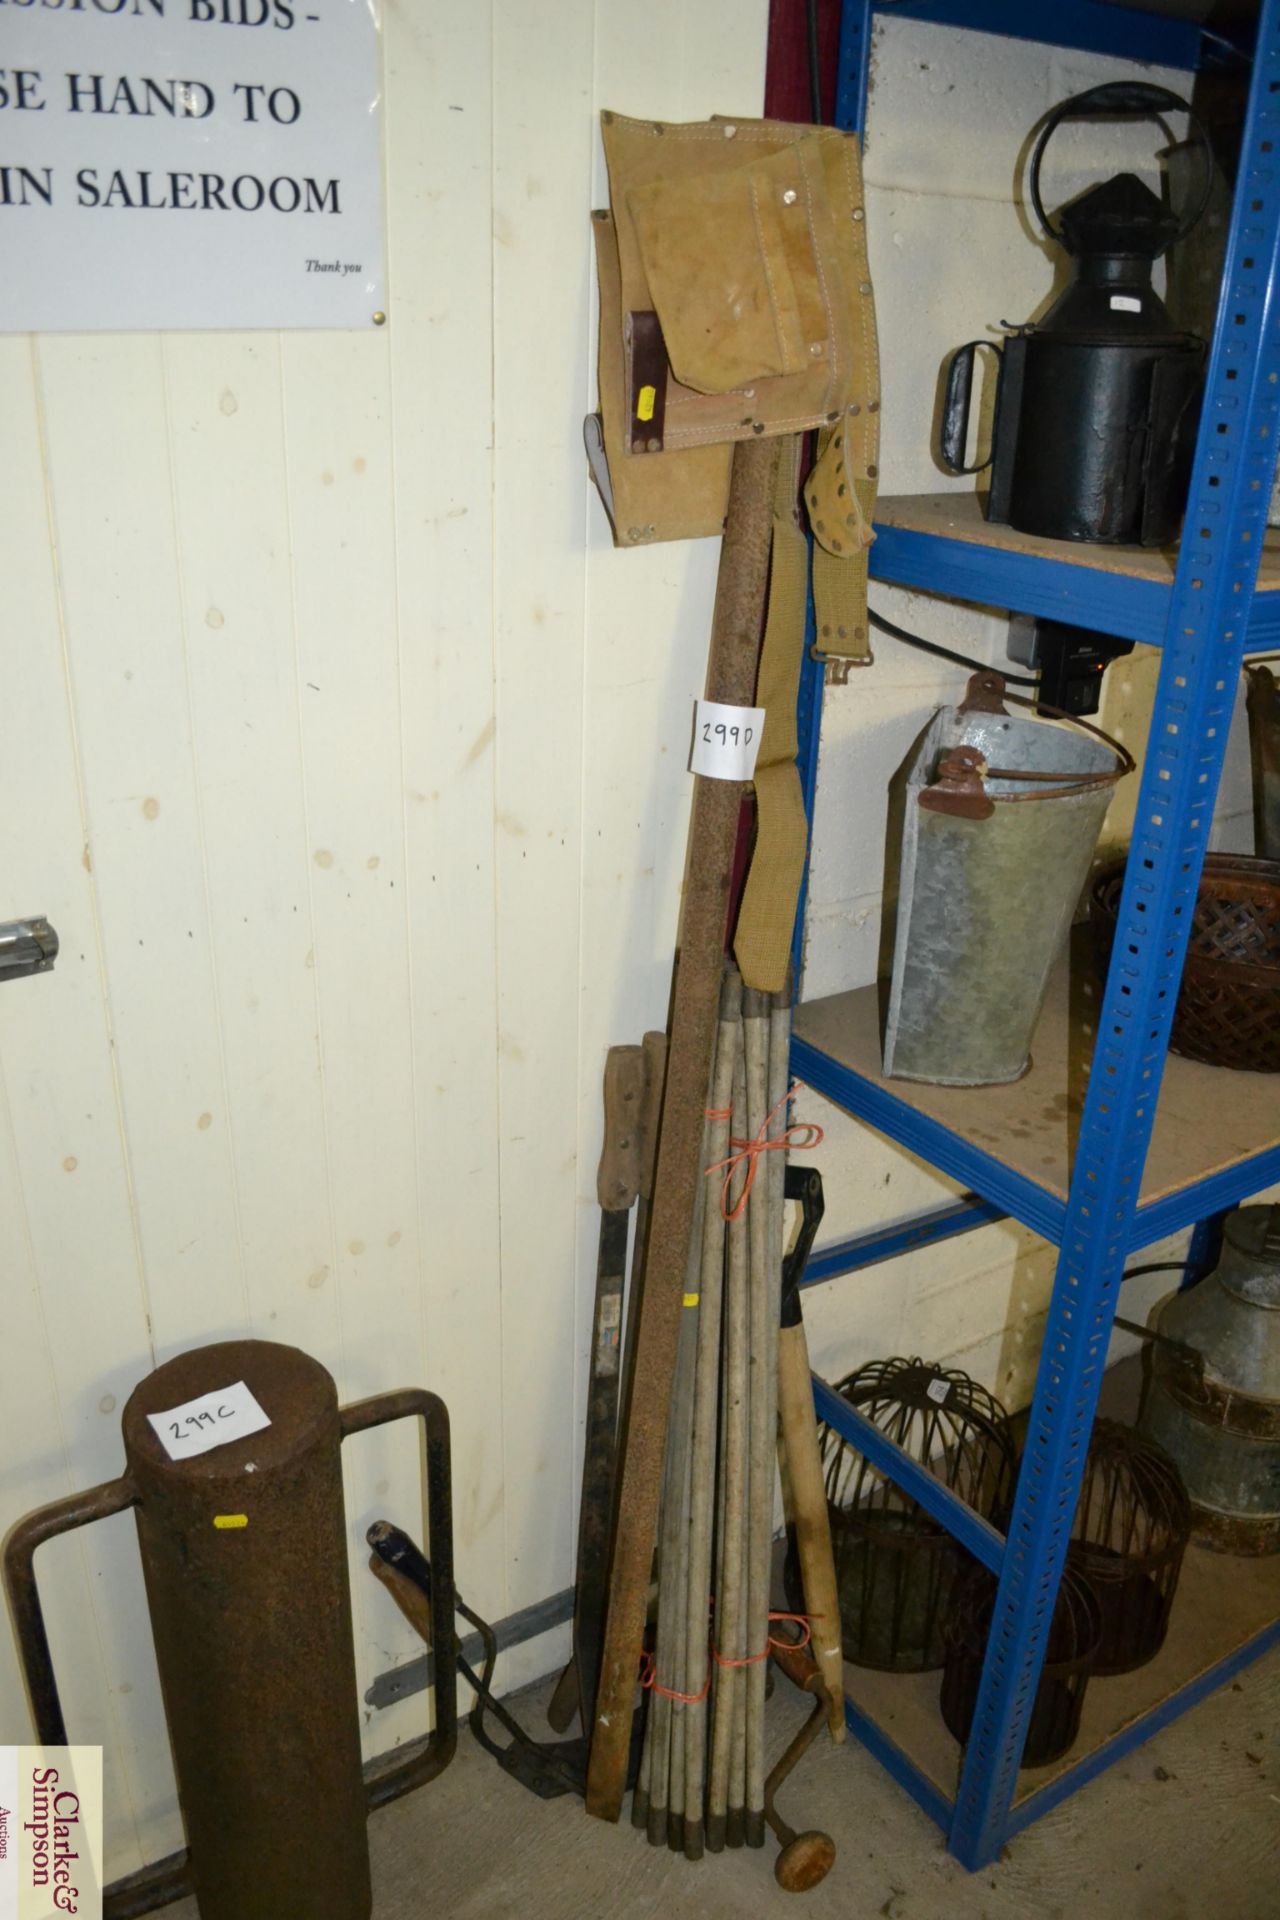 Quantity of drain rods and various other hand tools.